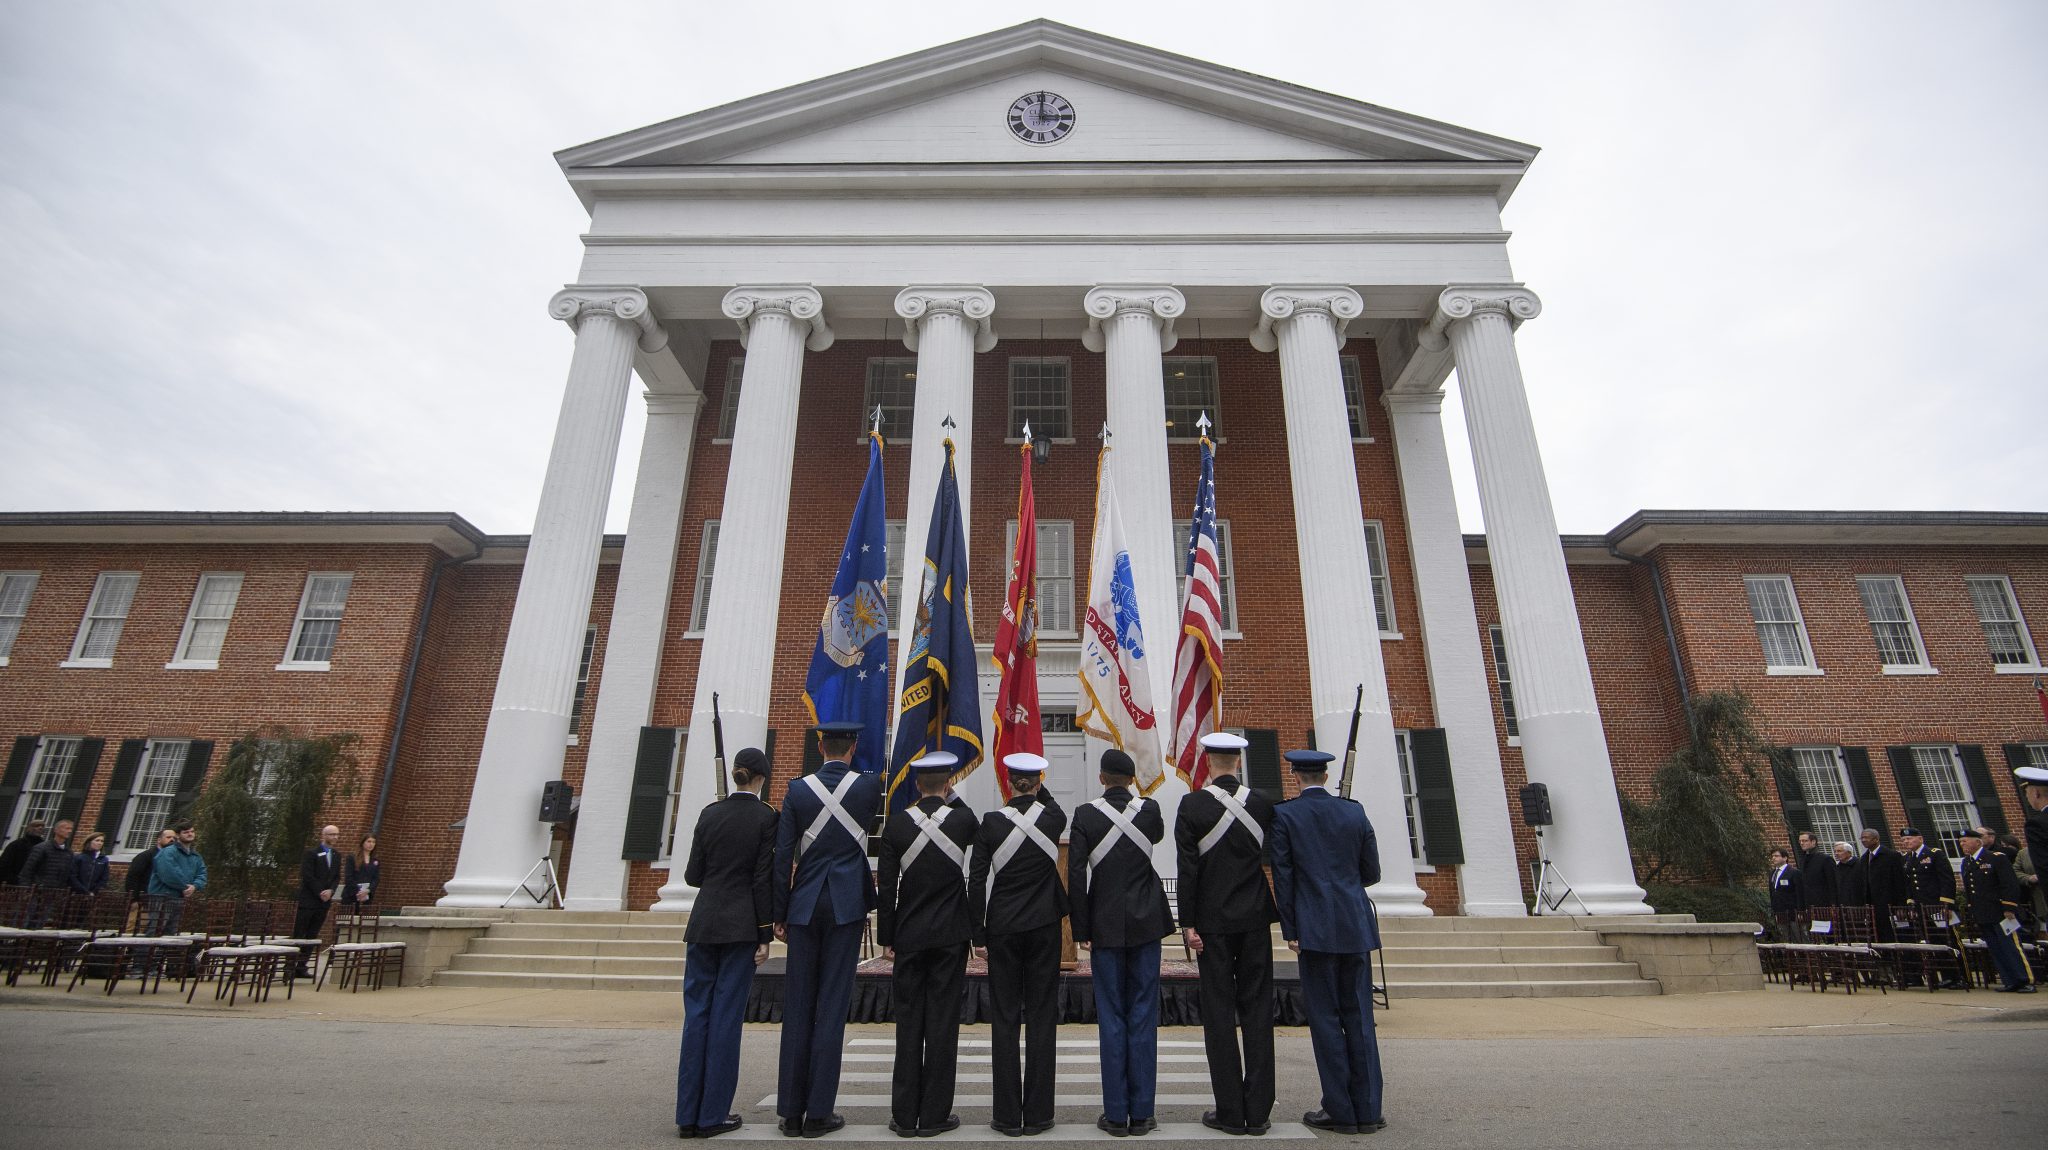 University of Mississippi ROTC cadets, midshipmen and Marines present the colors at the pass in review Thursday, Nov. 14, 2019 for UM Chancellor Glenn Boyce. Photo by Thomas Graning/Ole Miss Digital Imaging Services 